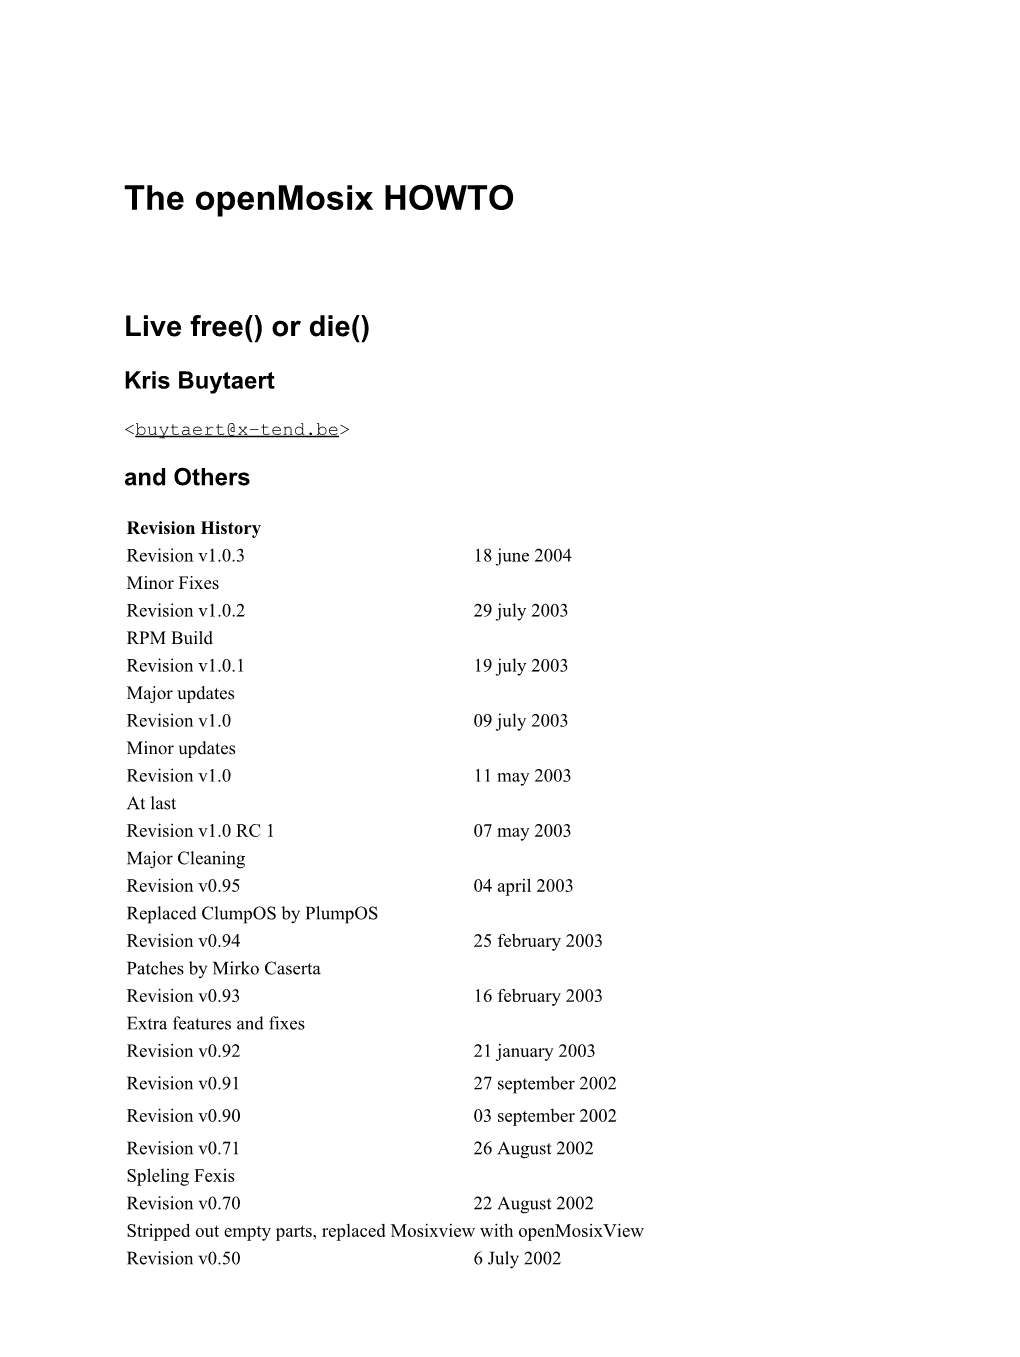 The Openmosix HOWTO